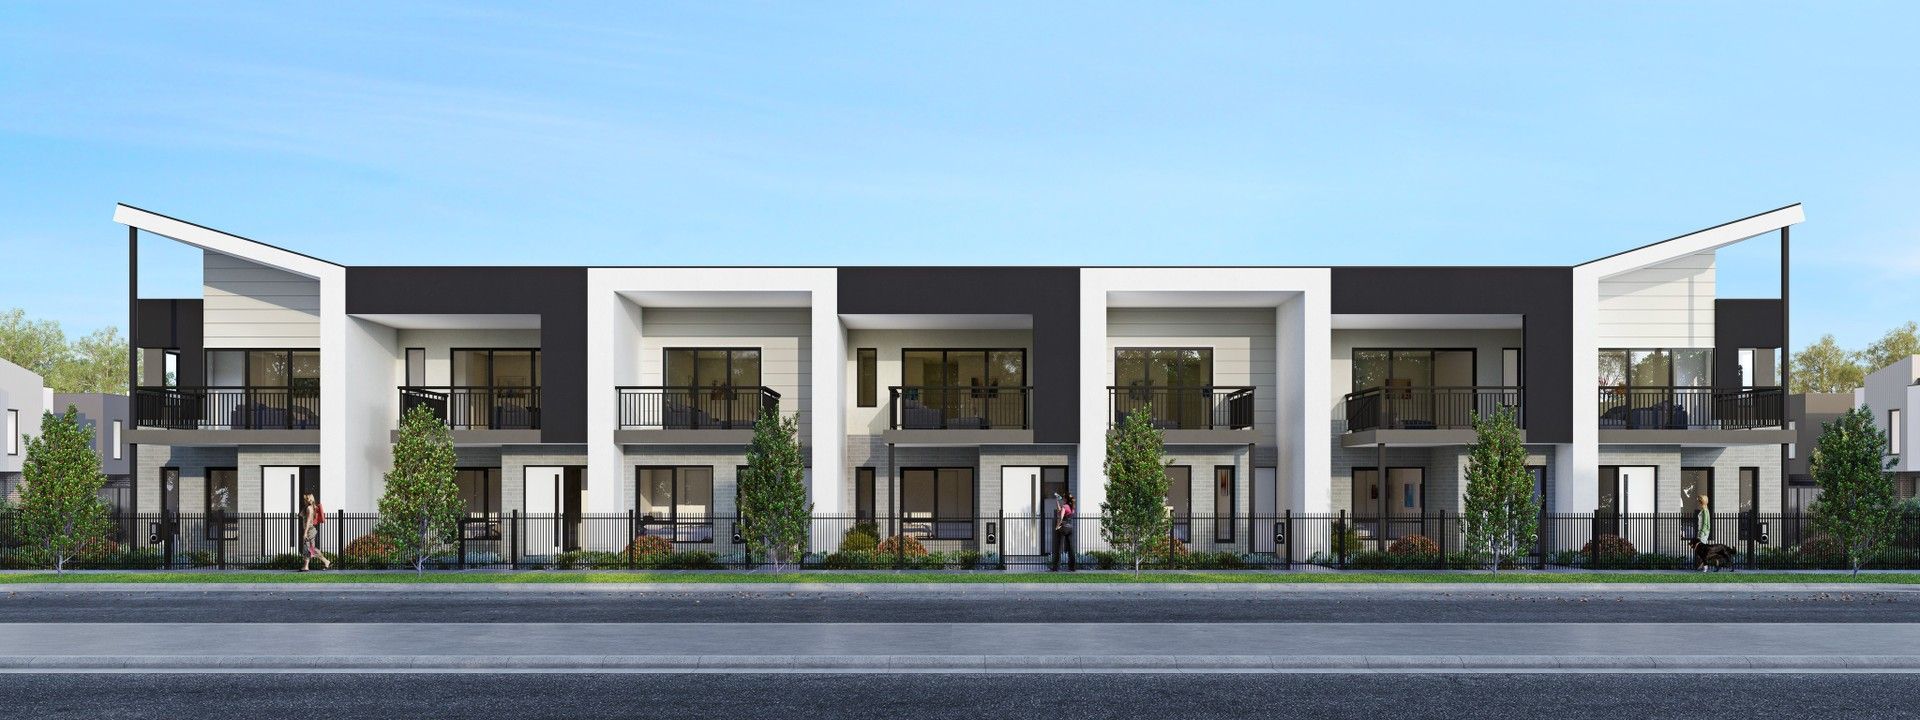 Parkville Corner Townhome by Metricon Homes, Kalkallo VIC 3064, Image 2